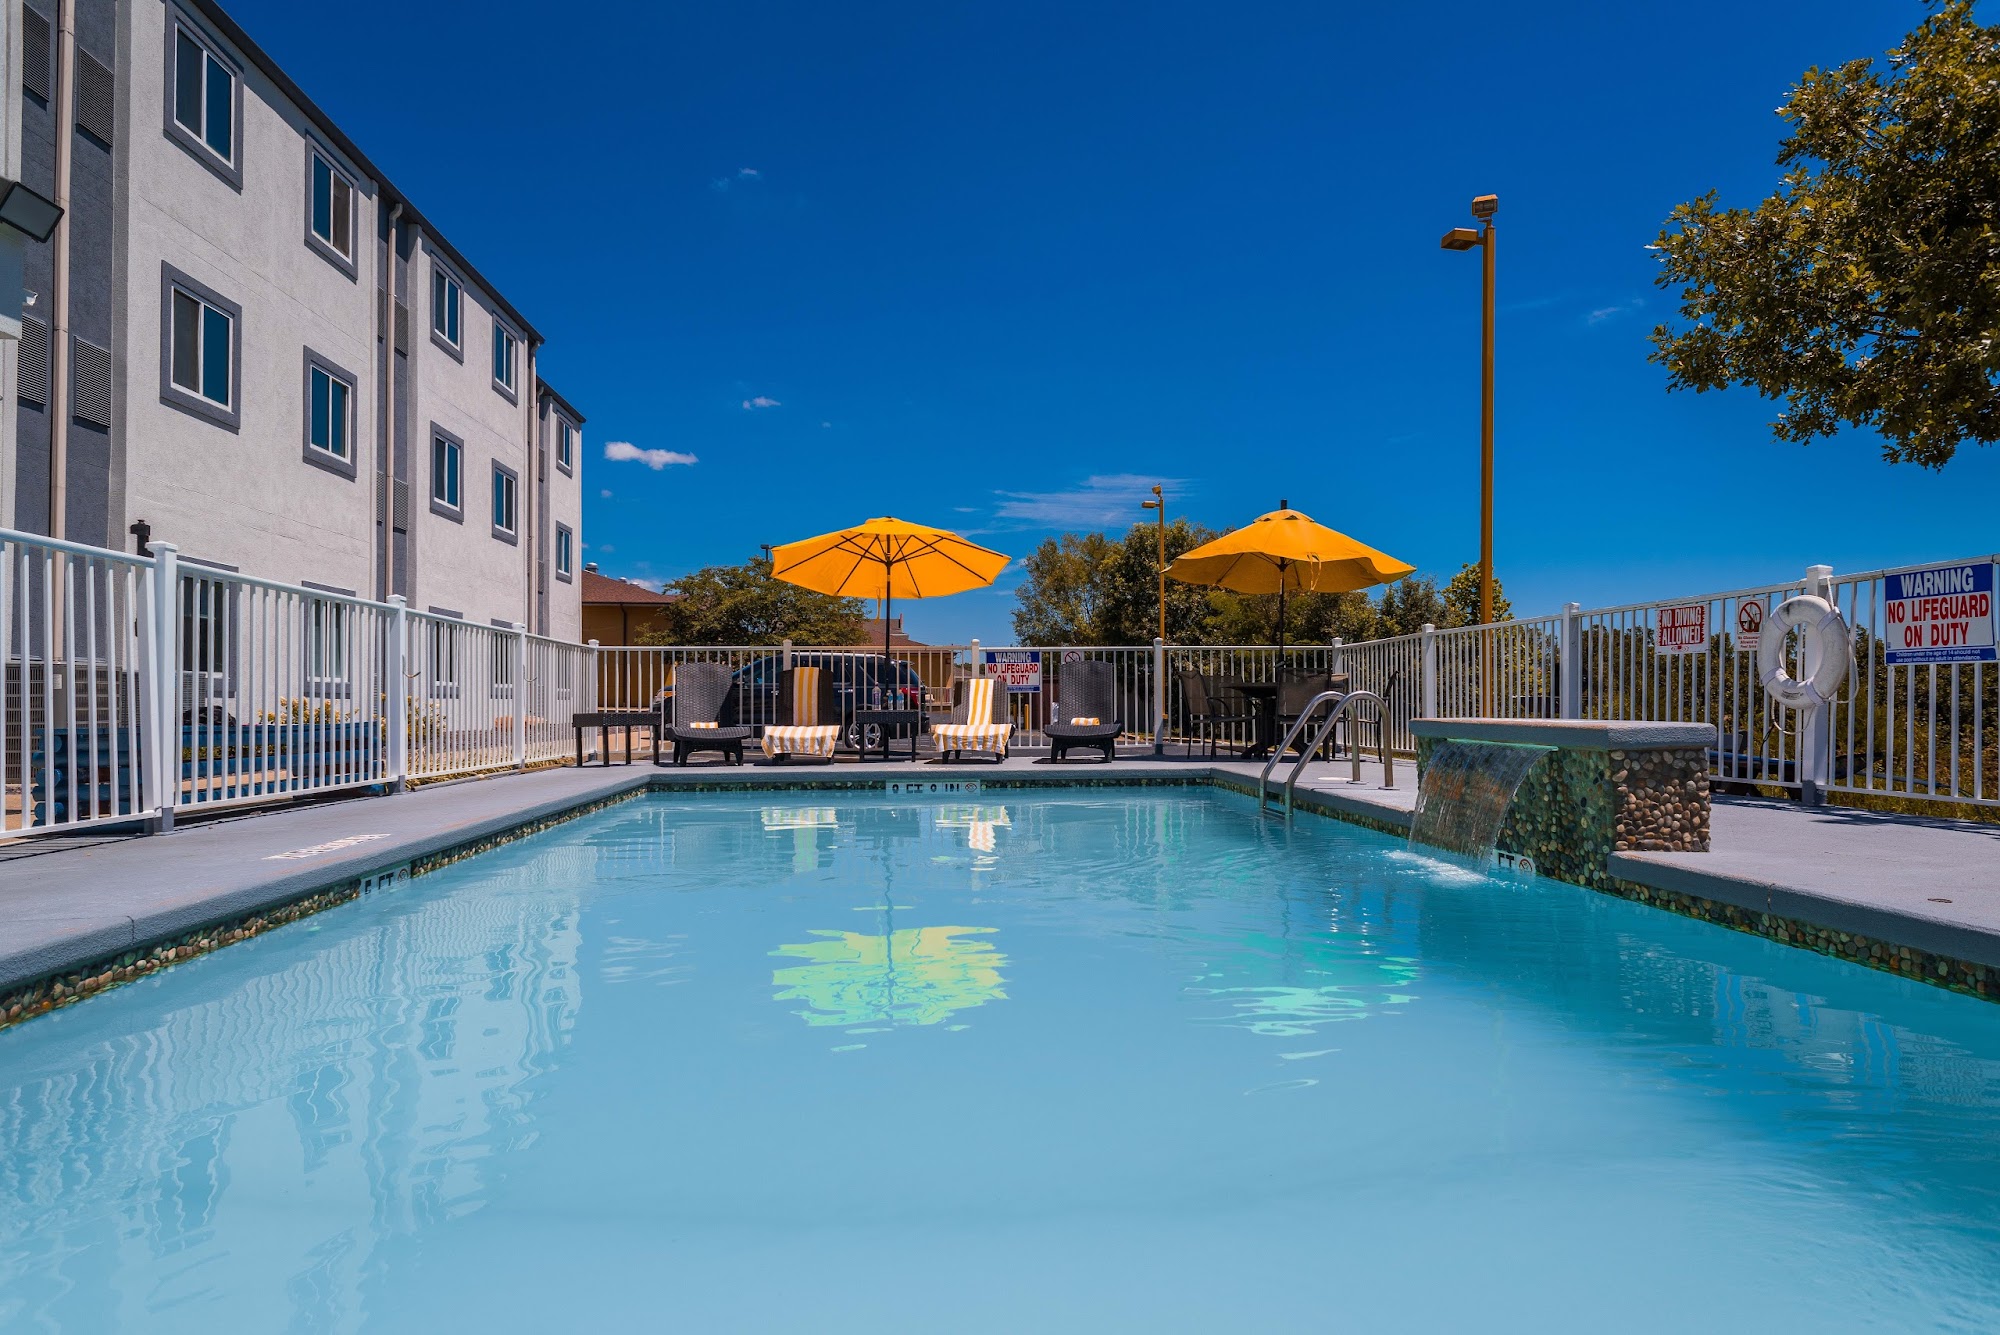 Studio Z Extended Stay Hotel & Lounge